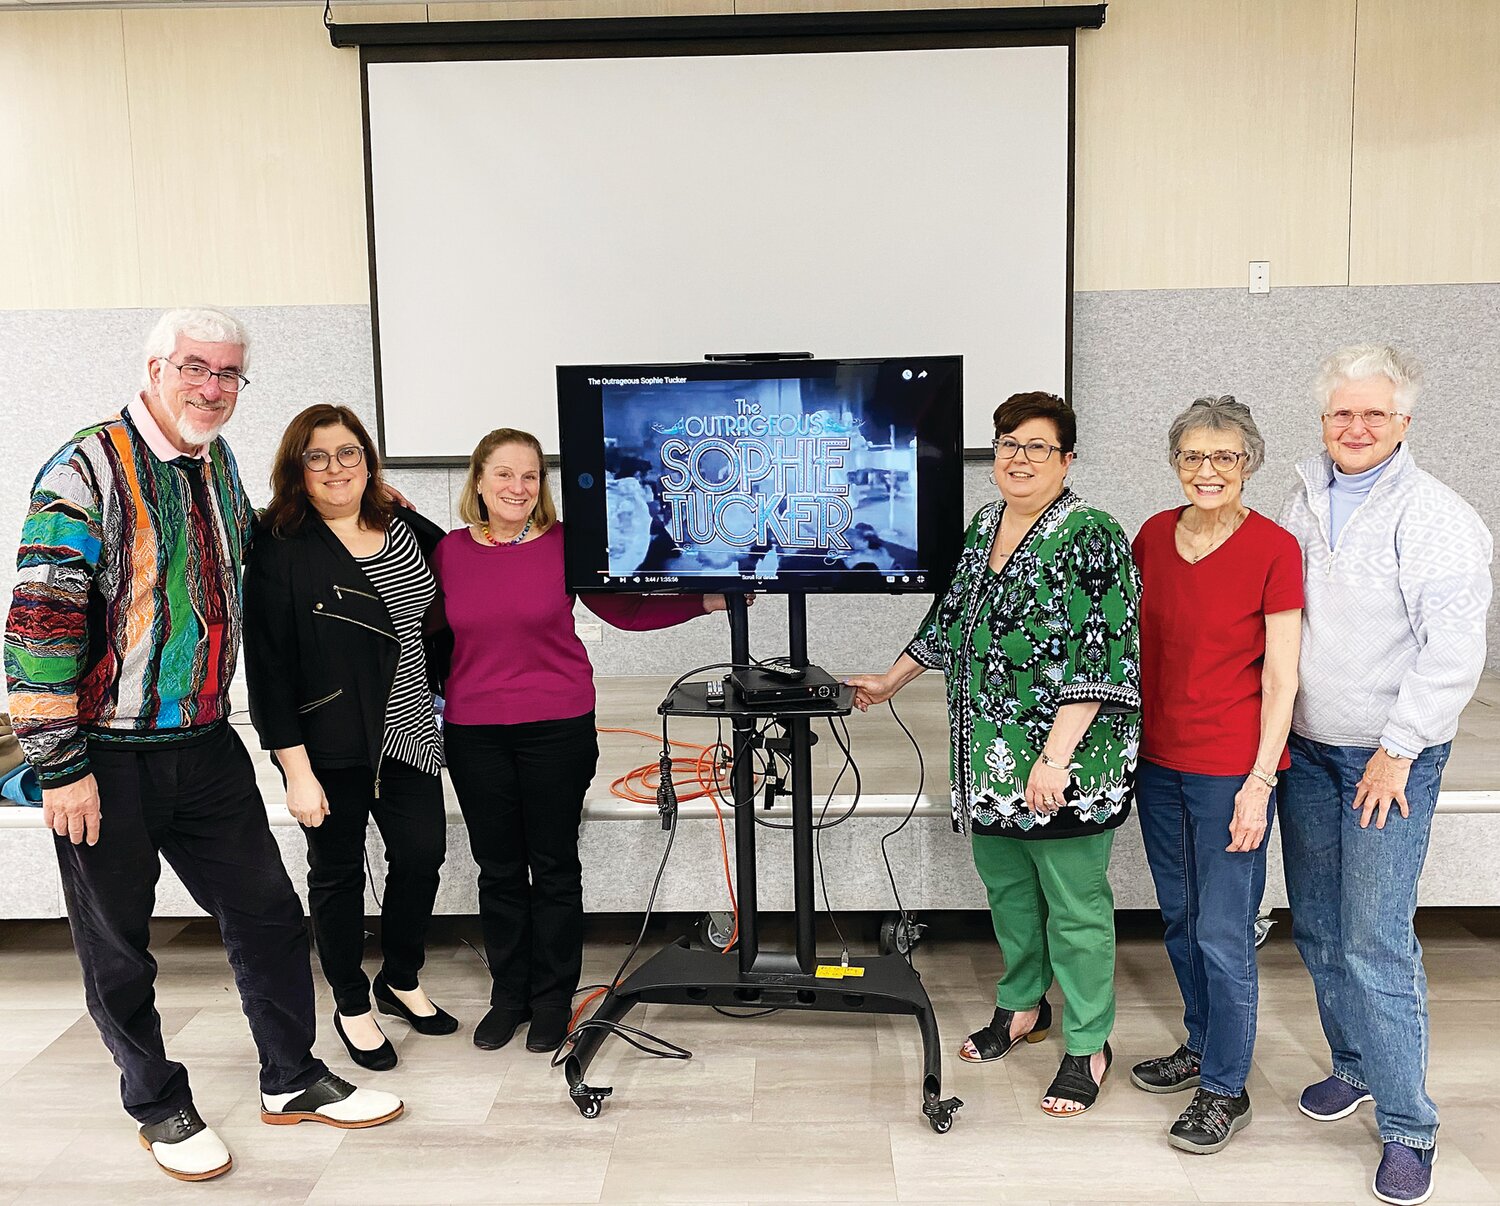 Lloyd Ecker (far left) and Susan Ecker (third from left), producers of “The Outrageous Sophie Tucker,” recently showed the documentary at KleinLife in Northeast Philadelphia. With them are (from left) KlineLife director of support services Inna Gulko; Northeast Philadelphia Program Director Andrea Kimelheim; Judy Steinberg; and Lenore Volin.